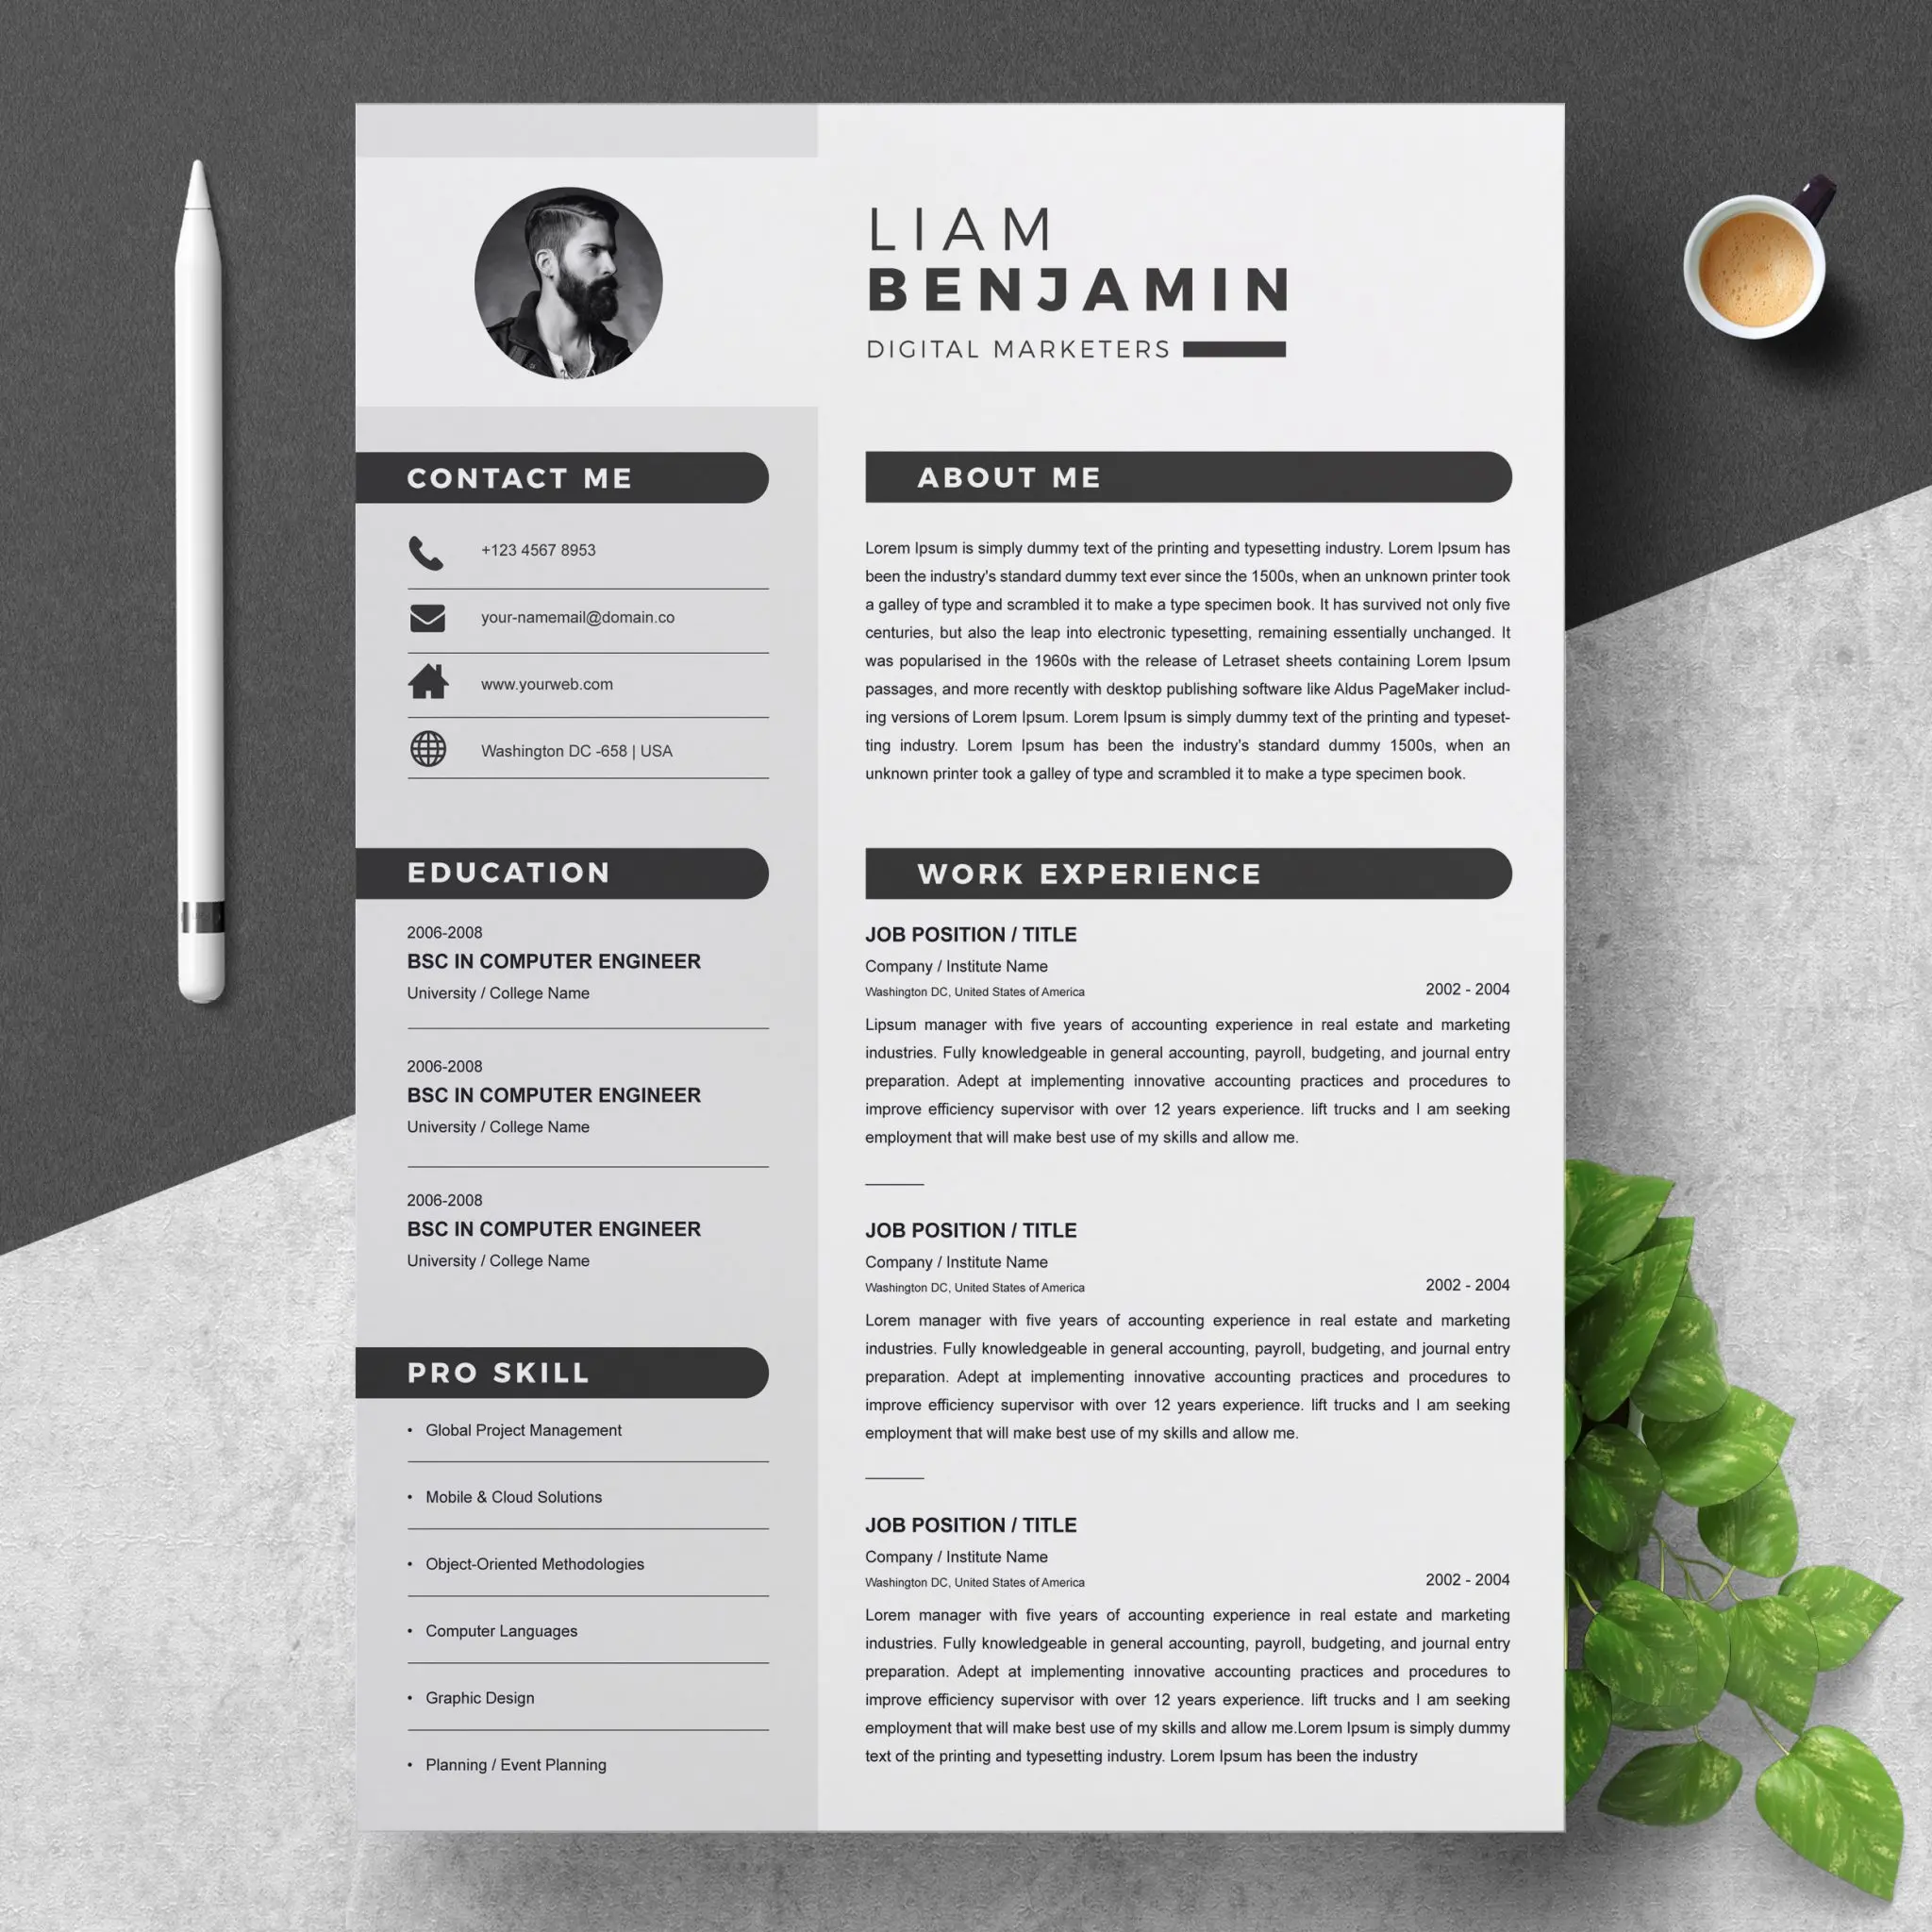 I Will Design You Professional Resume Or CV Template To Use And Apply For Jobs